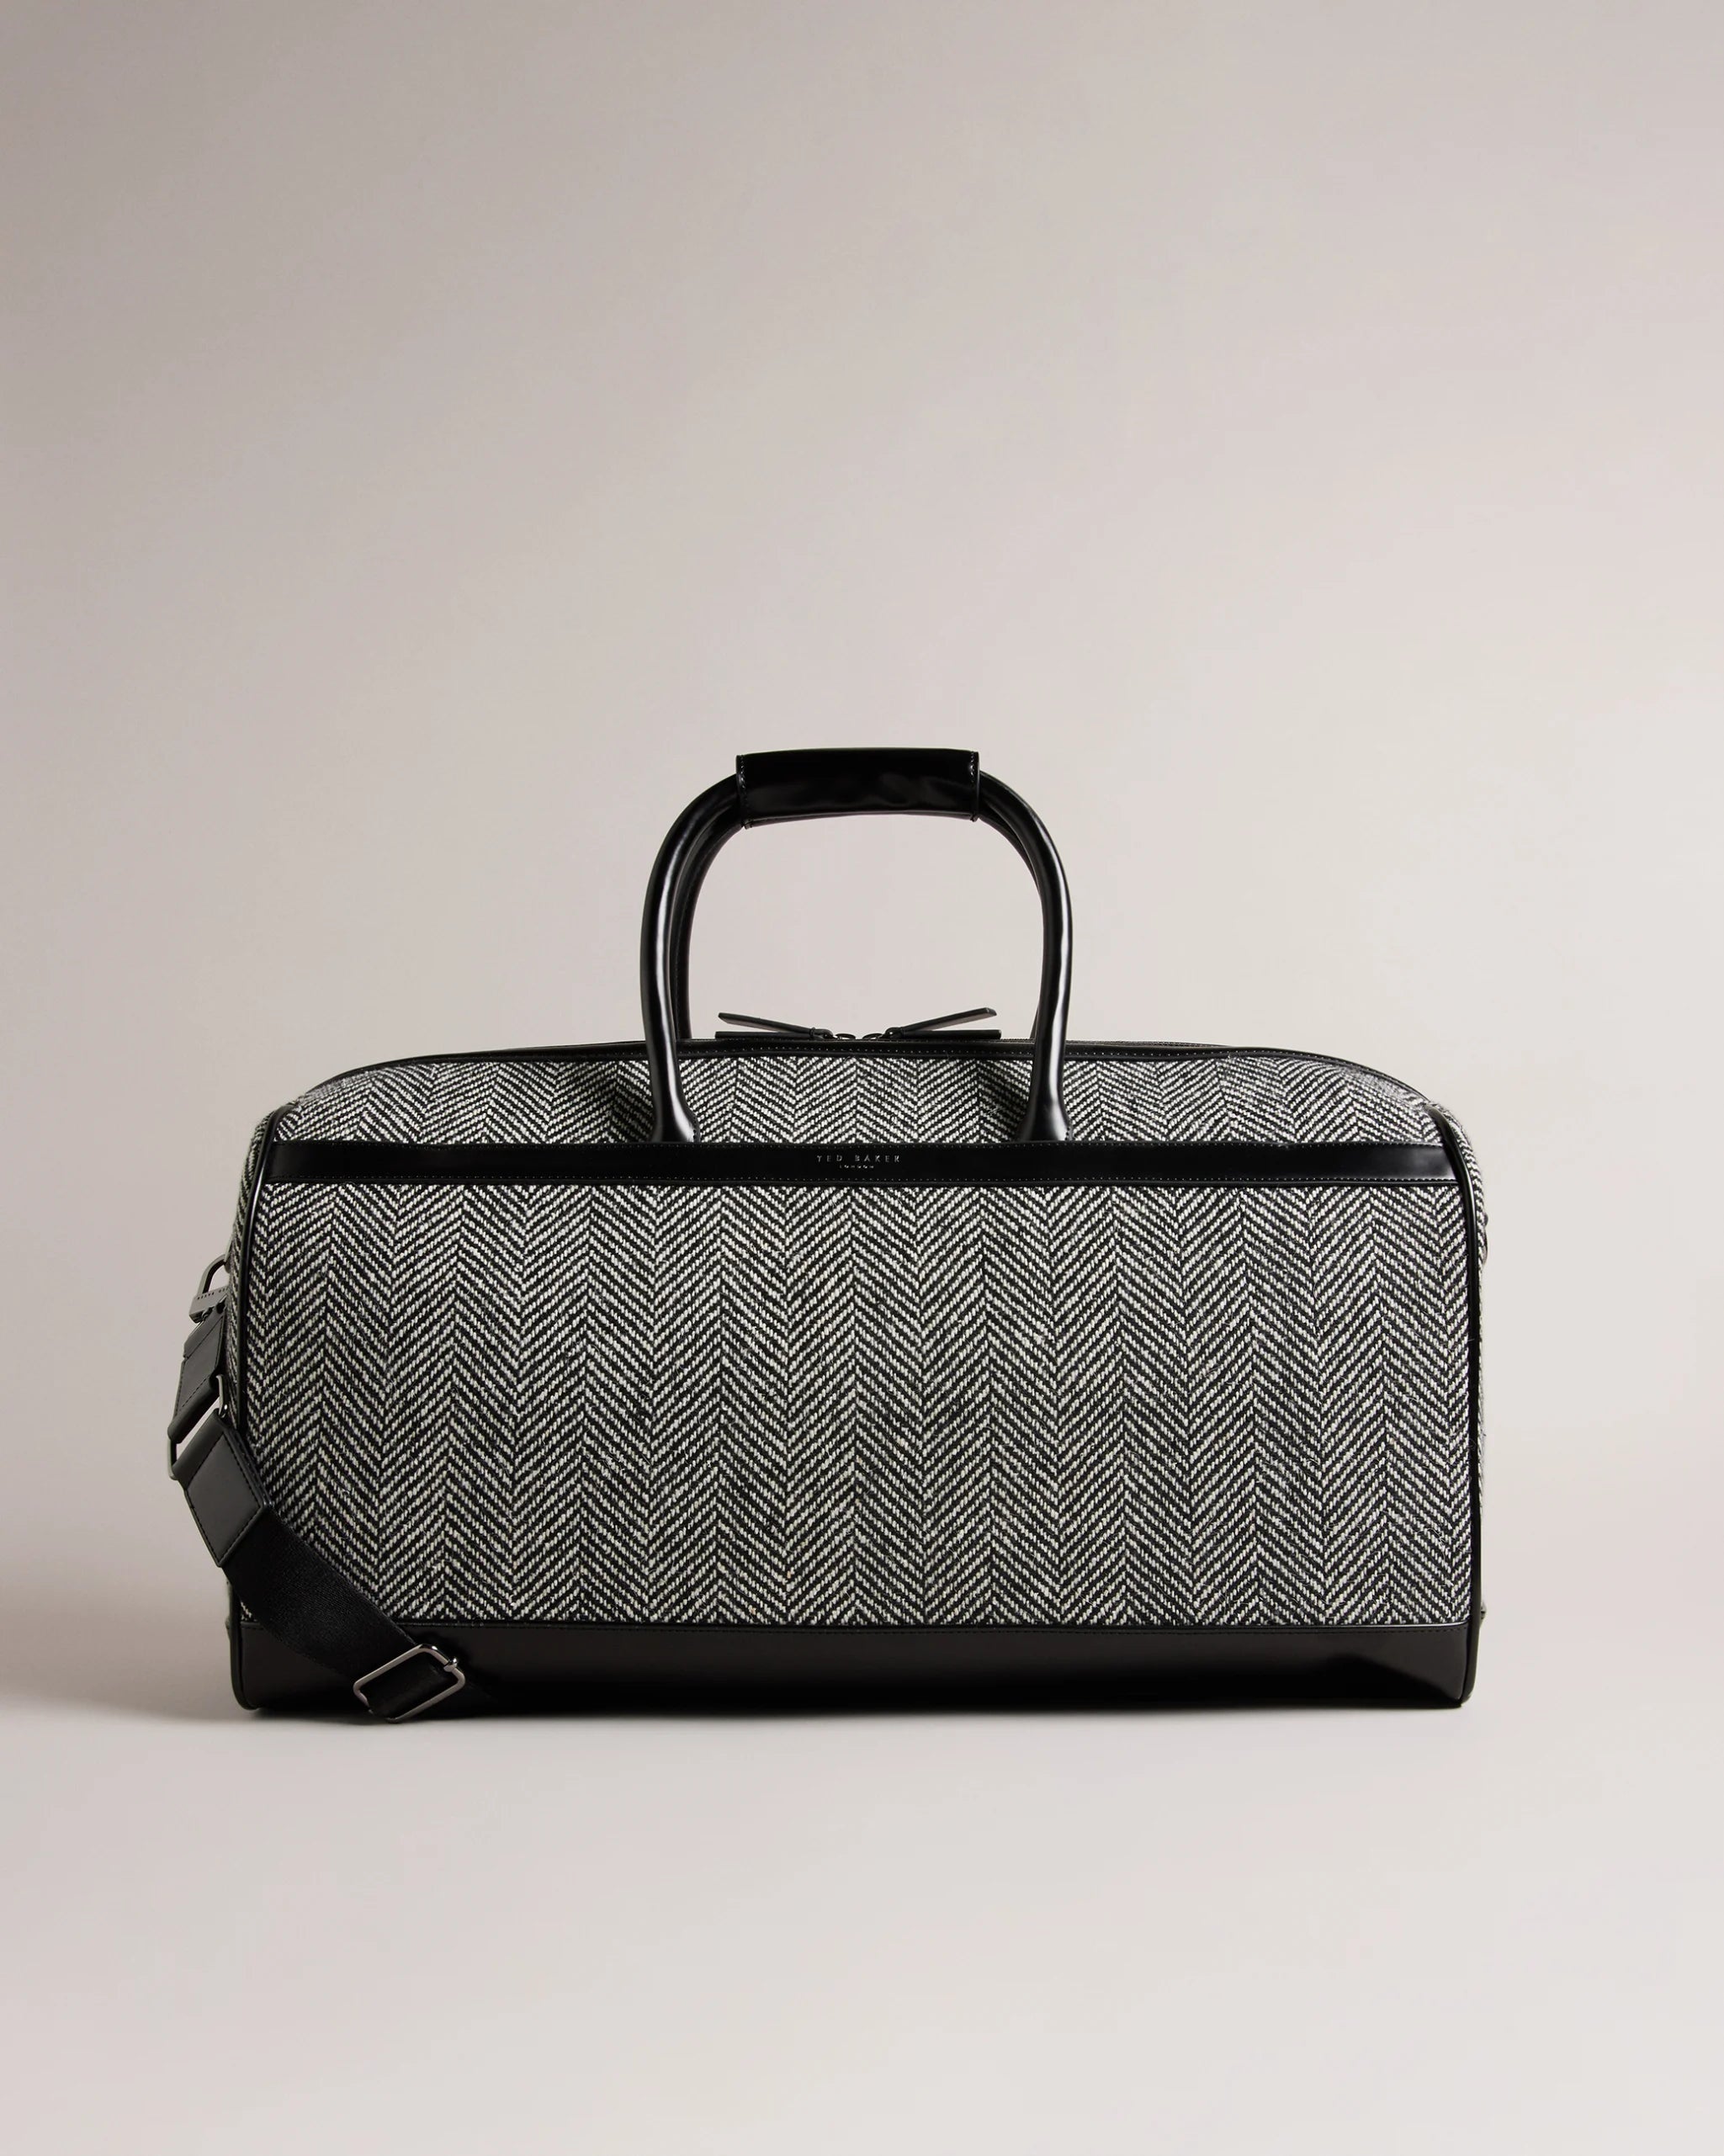 Ted Baker Andersn Holdall Bag in Black 270498  | Shop from eightywingold an official brand partner for Ted Baker in Canada and US.